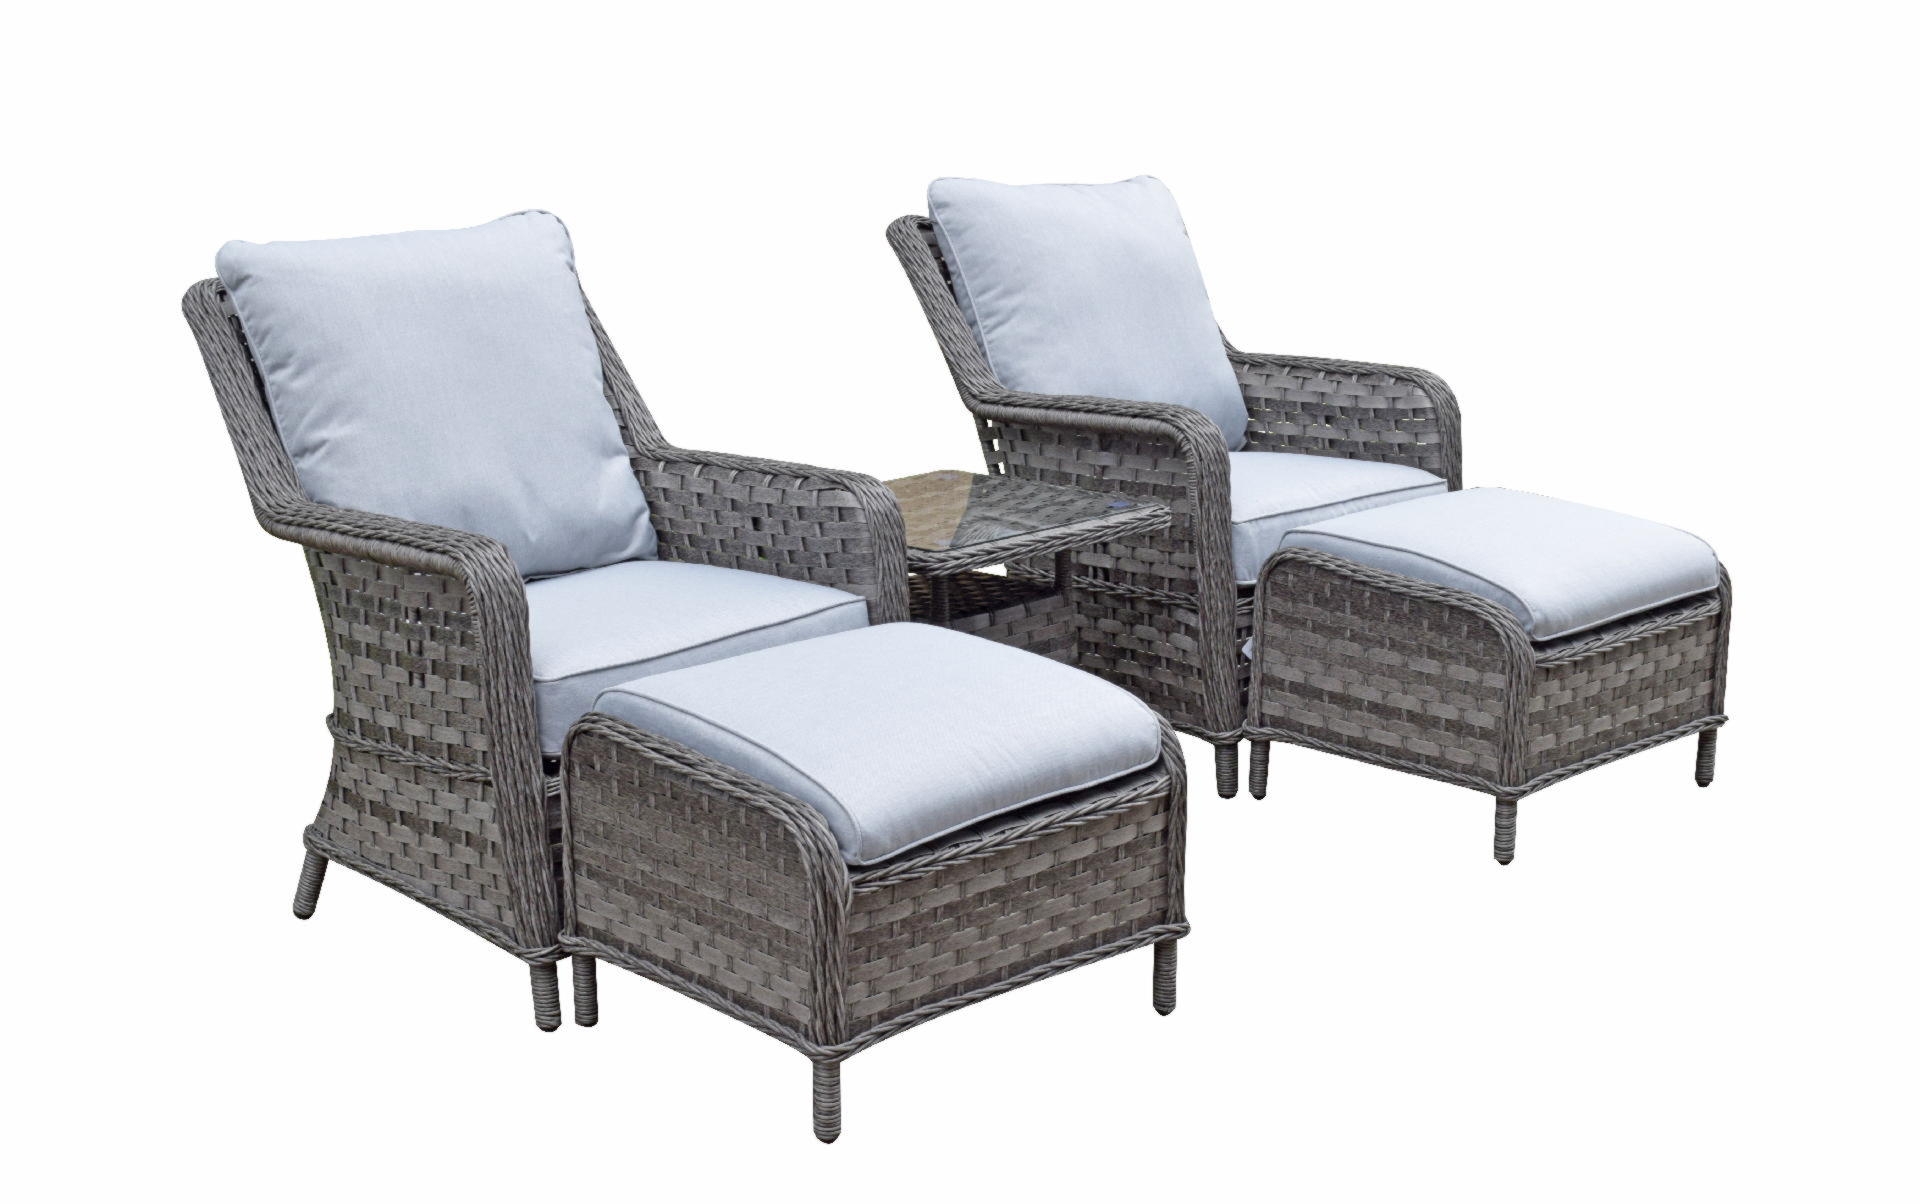 Hatherton Two Seater Set- In Grey with foot stalls